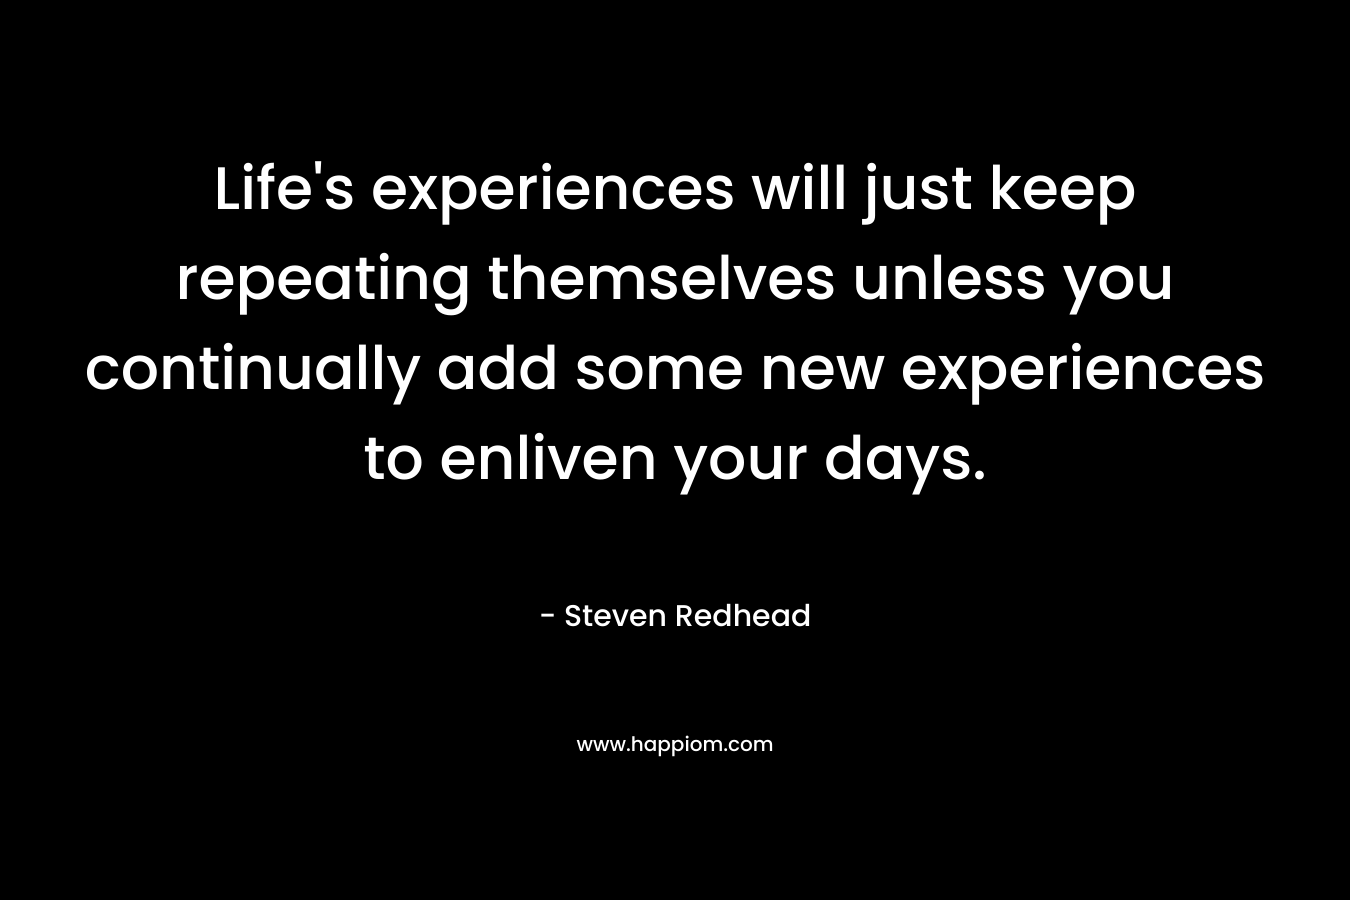 Life's experiences will just keep repeating themselves unless you continually add some new experiences to enliven your days.